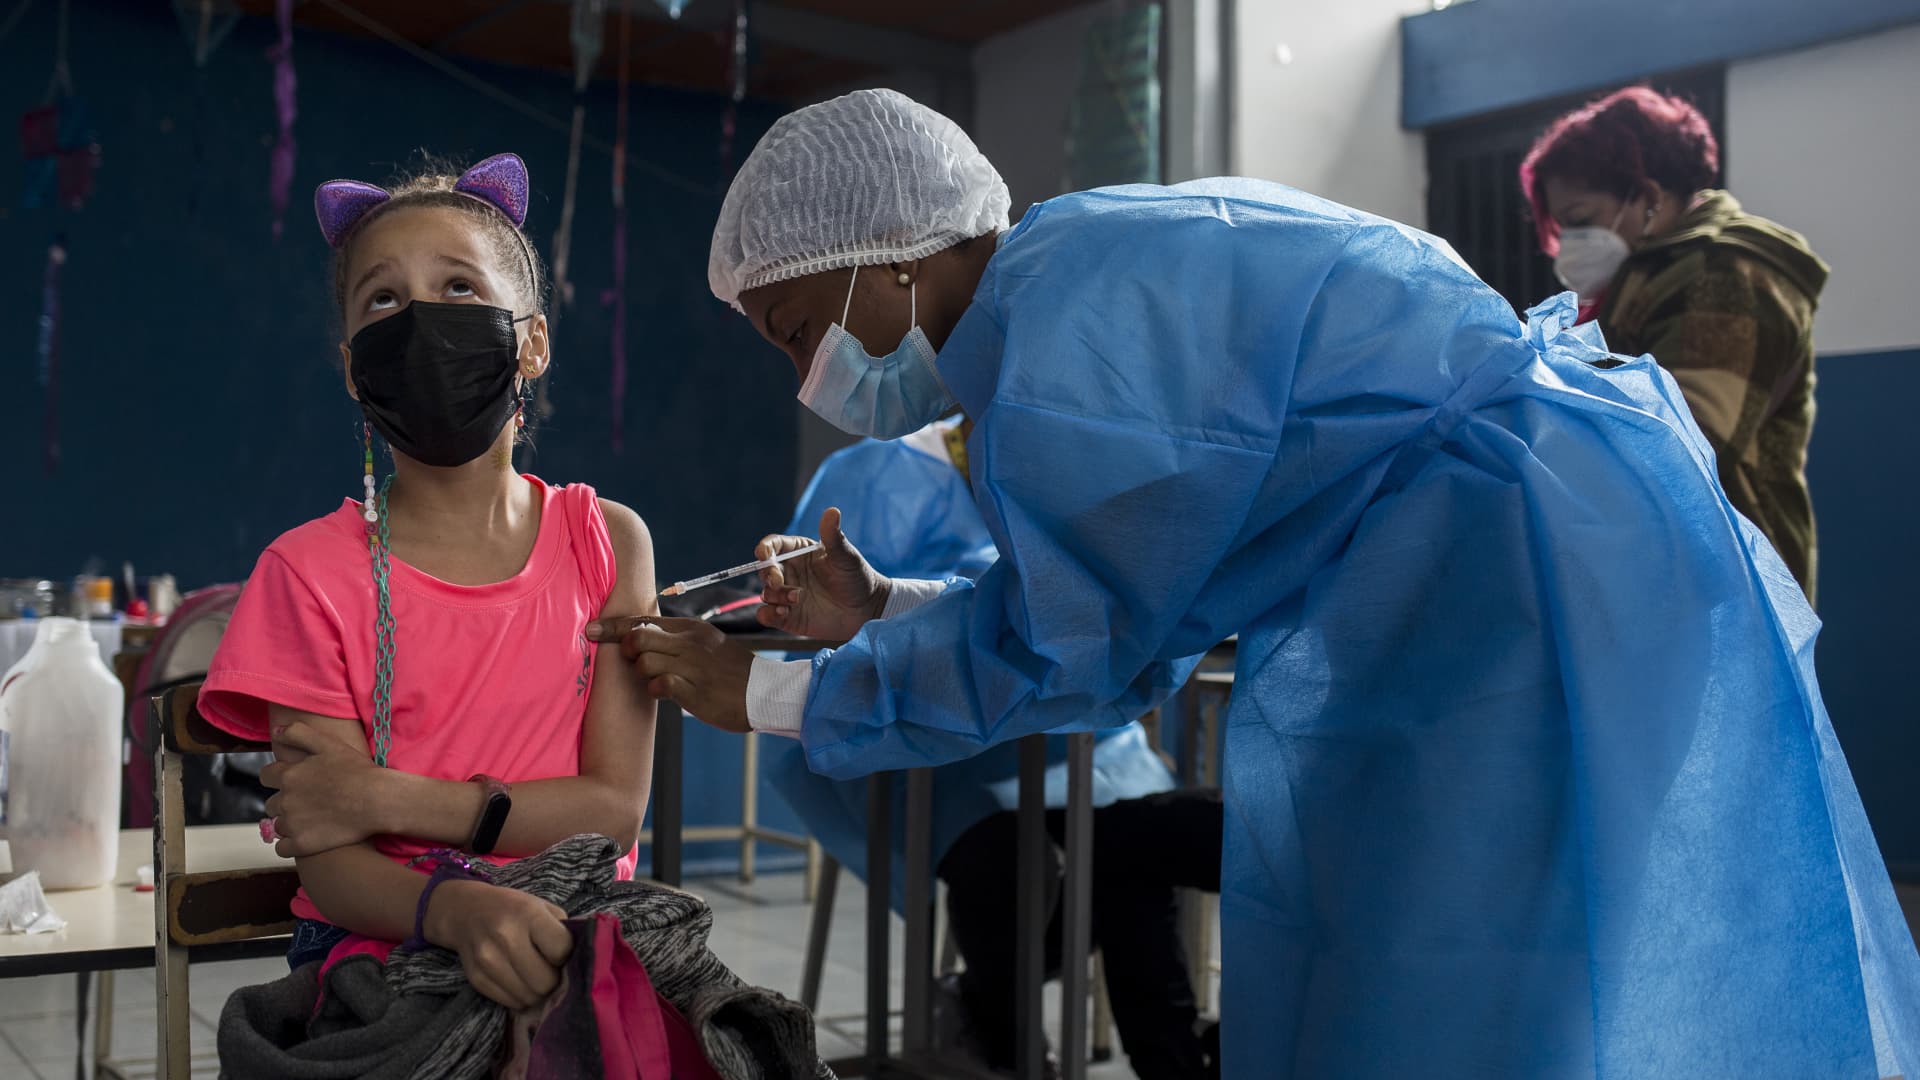 Students, who are accompanied by their mother, are being vaccinated with a dose of the Soberana 2 vaccine against the new coronavirus disease, COVID-19, developed in Cuba, at the Bolivar educational center in Caracas, Venezuela on December 13, 2021.